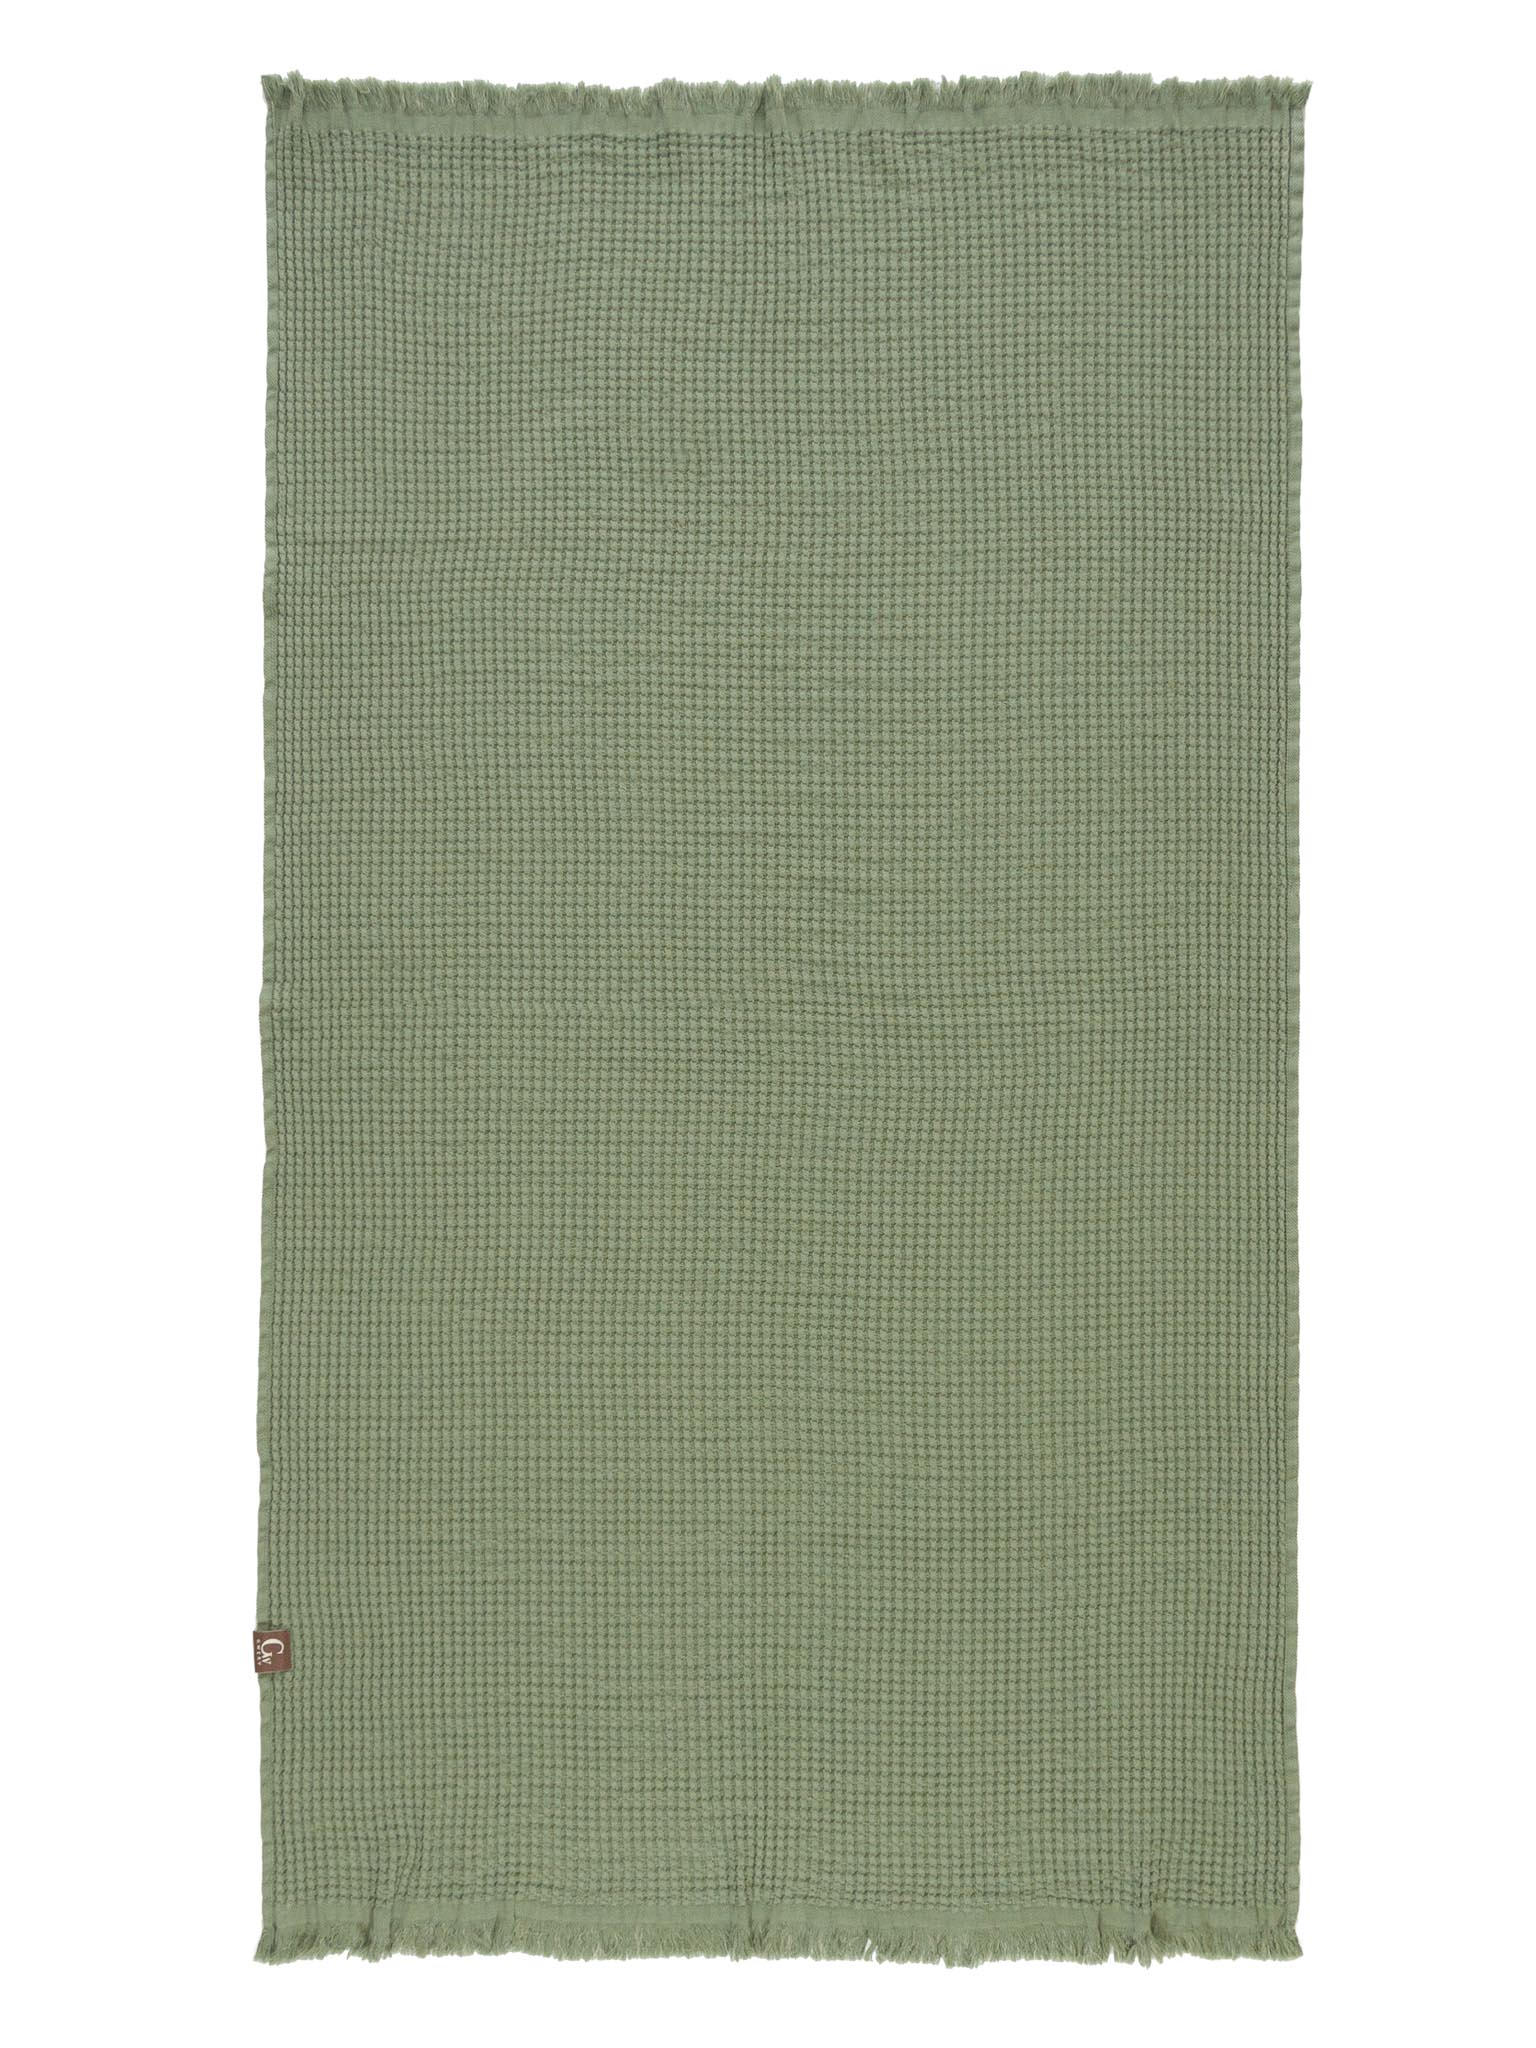 Green double sided, honeycomb beach towel open up